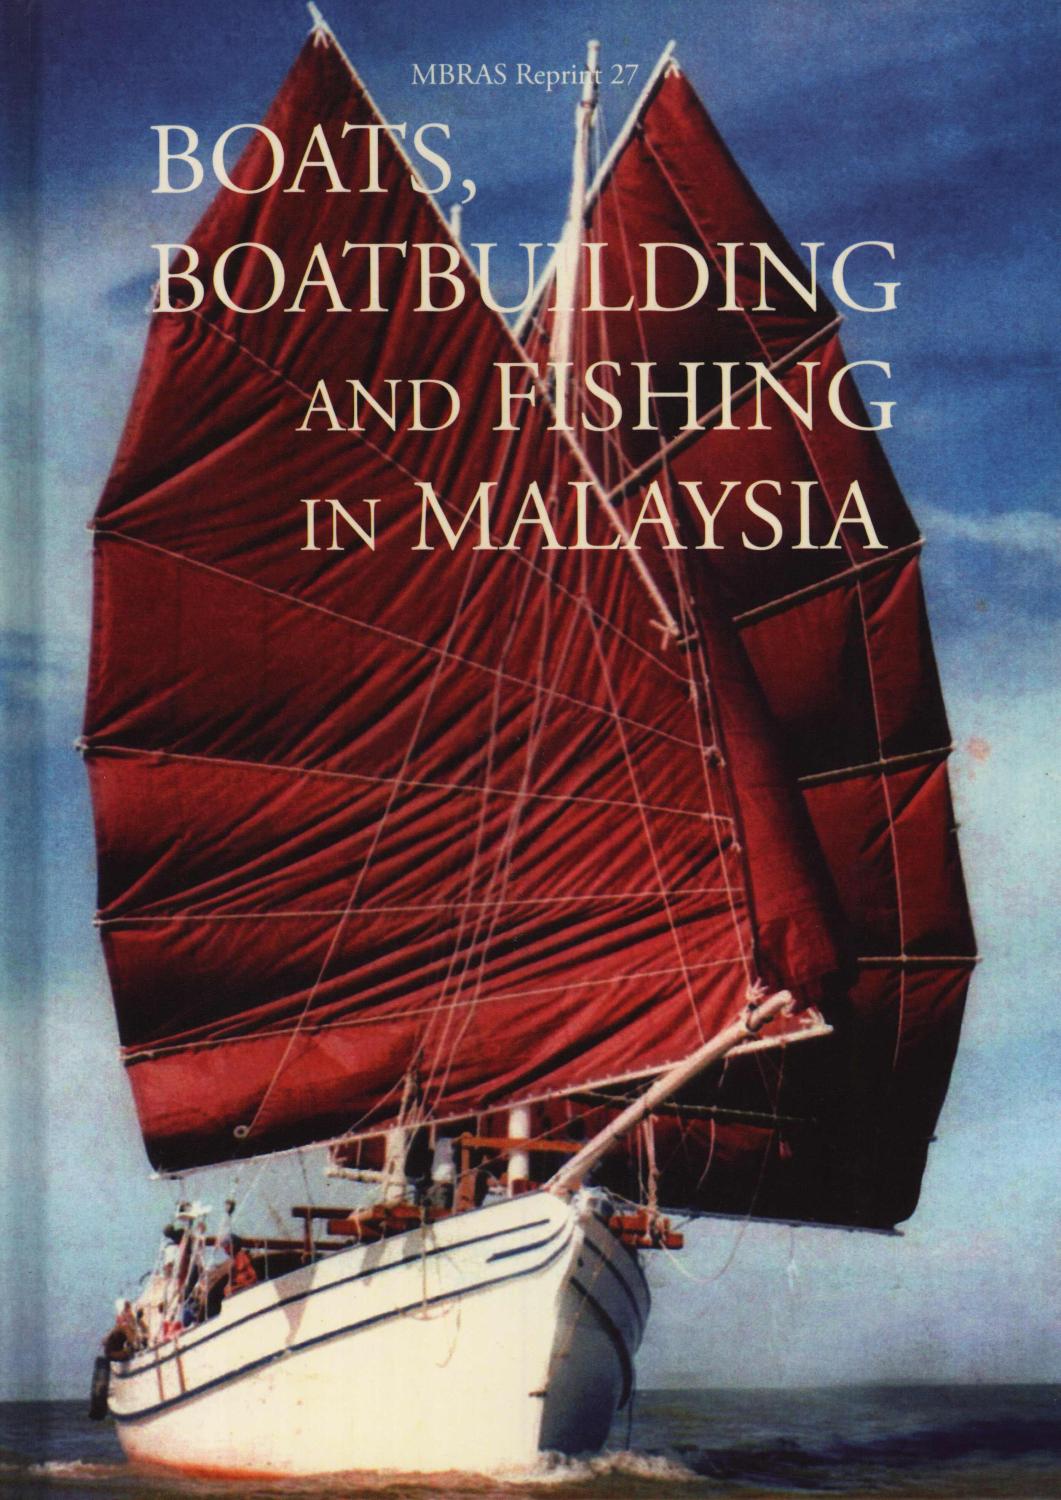 Boats, Boatbuilding and Fishing in Malaysia